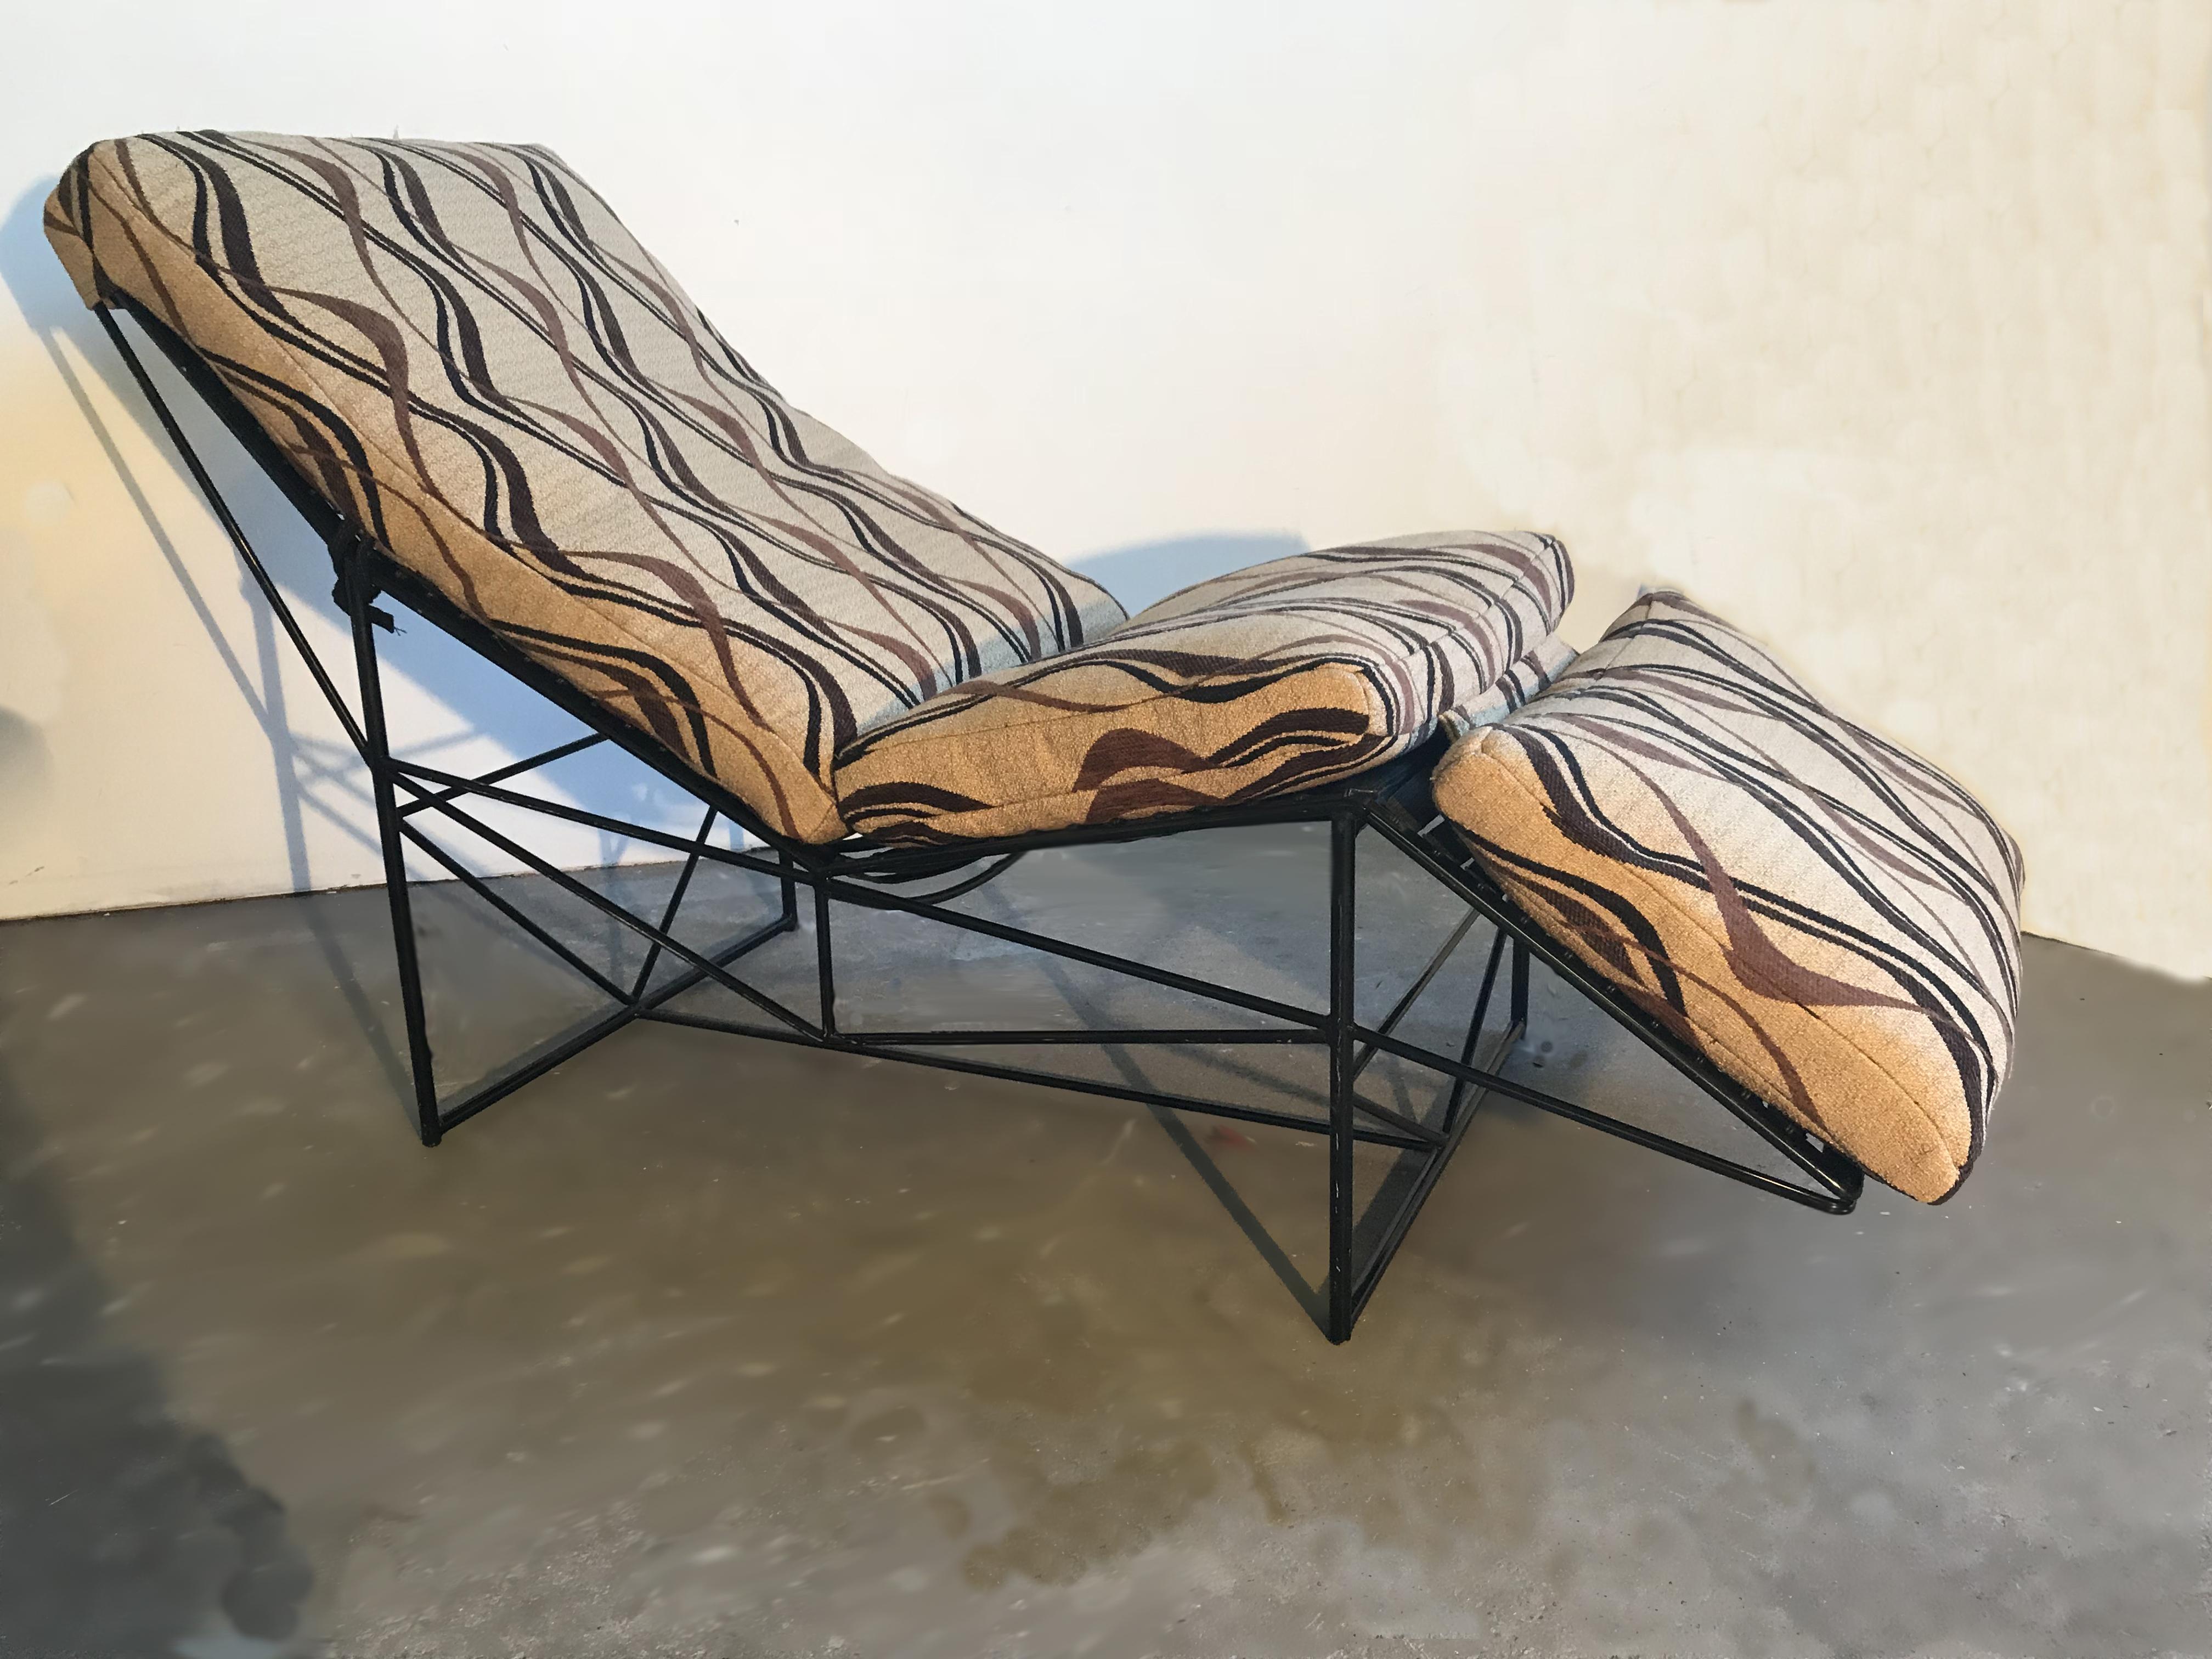 Metal Sculptural Chaise Lounge by Paolo Passerini, 1985